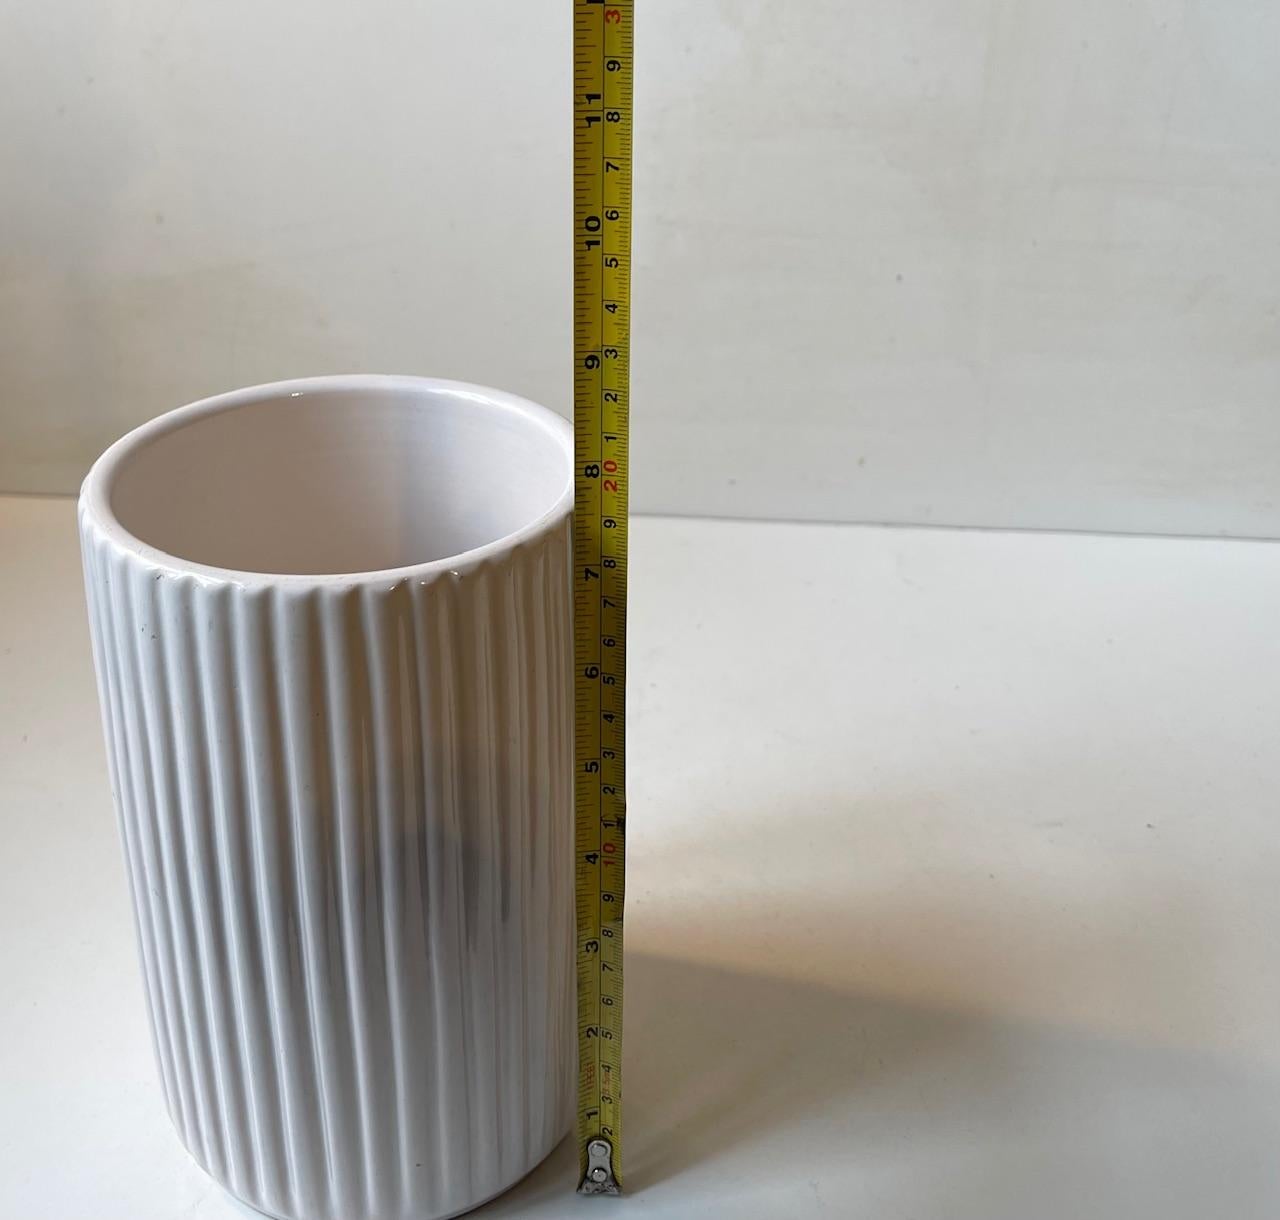 Mid-20th Century Fluted Architectural Ceramic Vase in White Glaze by L. Hjorth, 1940s For Sale